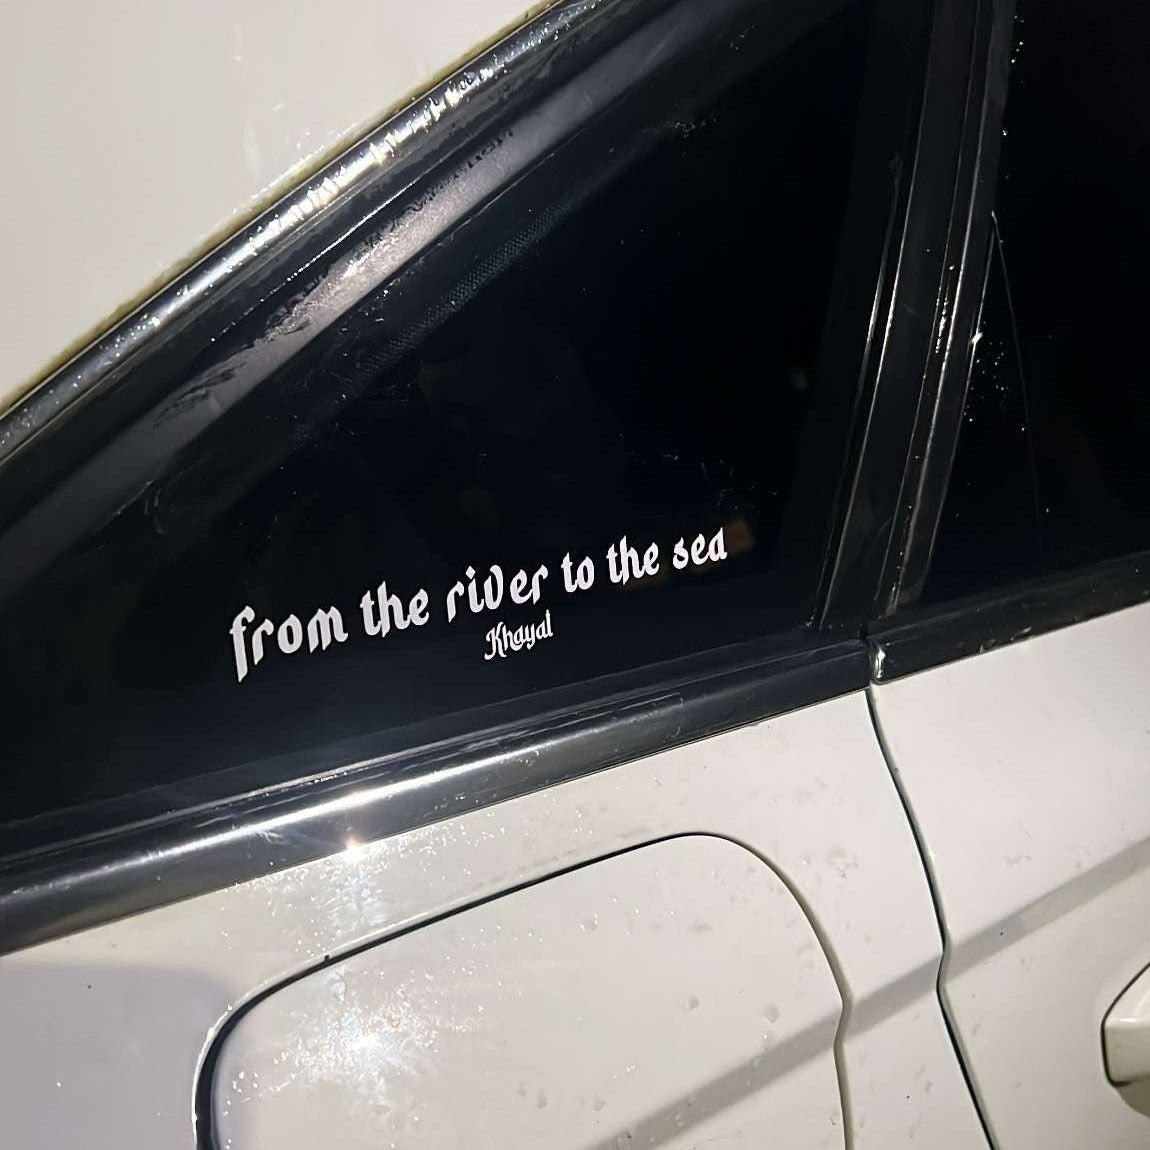 "FROM THE RIVER TO THE SEA" DECAL